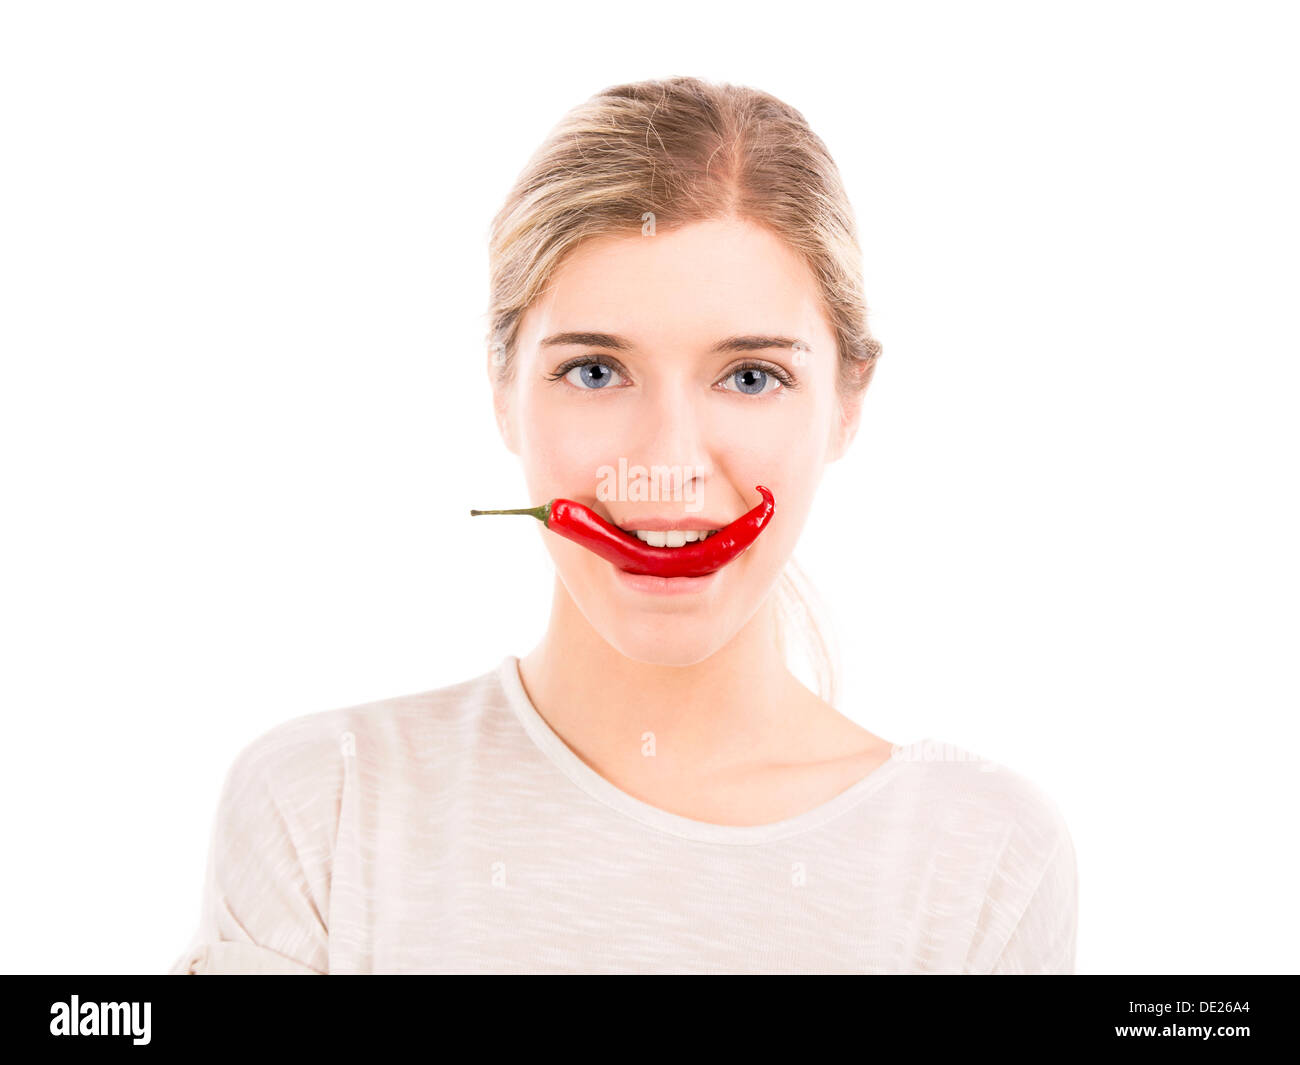 Beautiful girl biting a red chili pepper, isolated over a white background Stock Photo